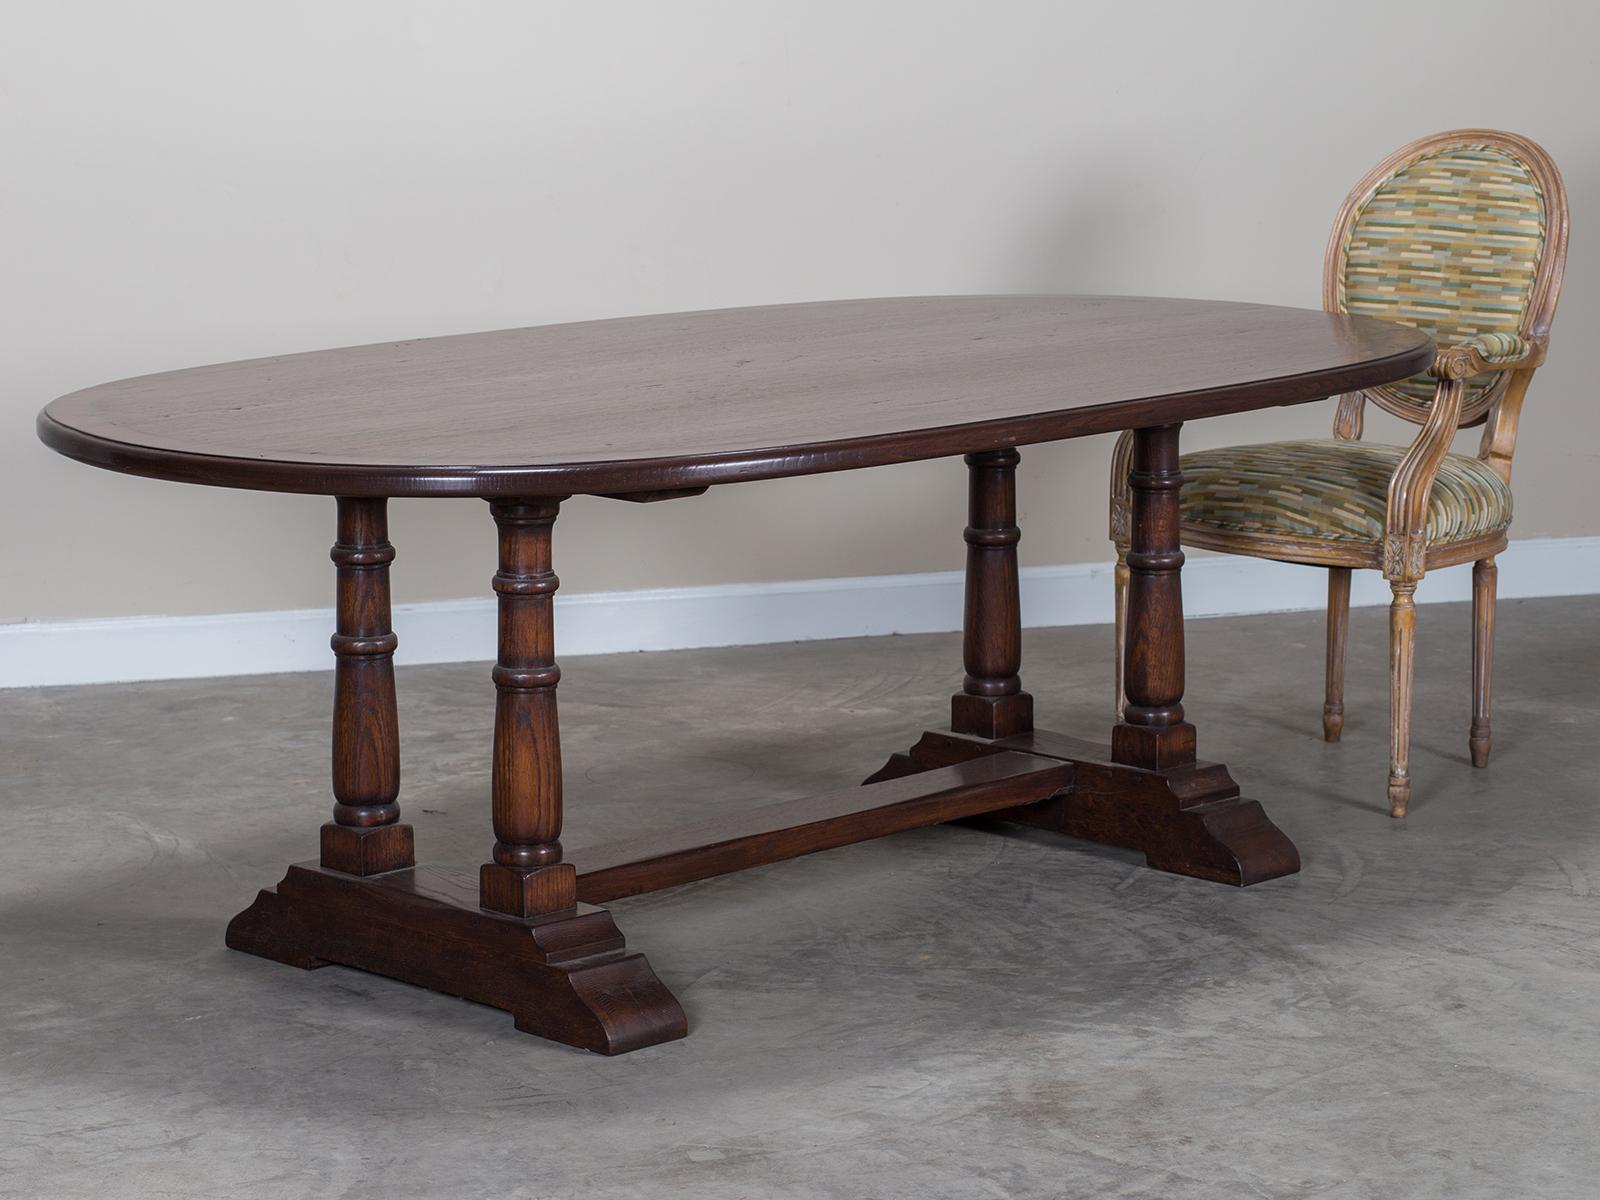 Hand-Crafted Modern Bespoke English Oval Oak Trestle Dining Table Crossbanded with Yewwood For Sale